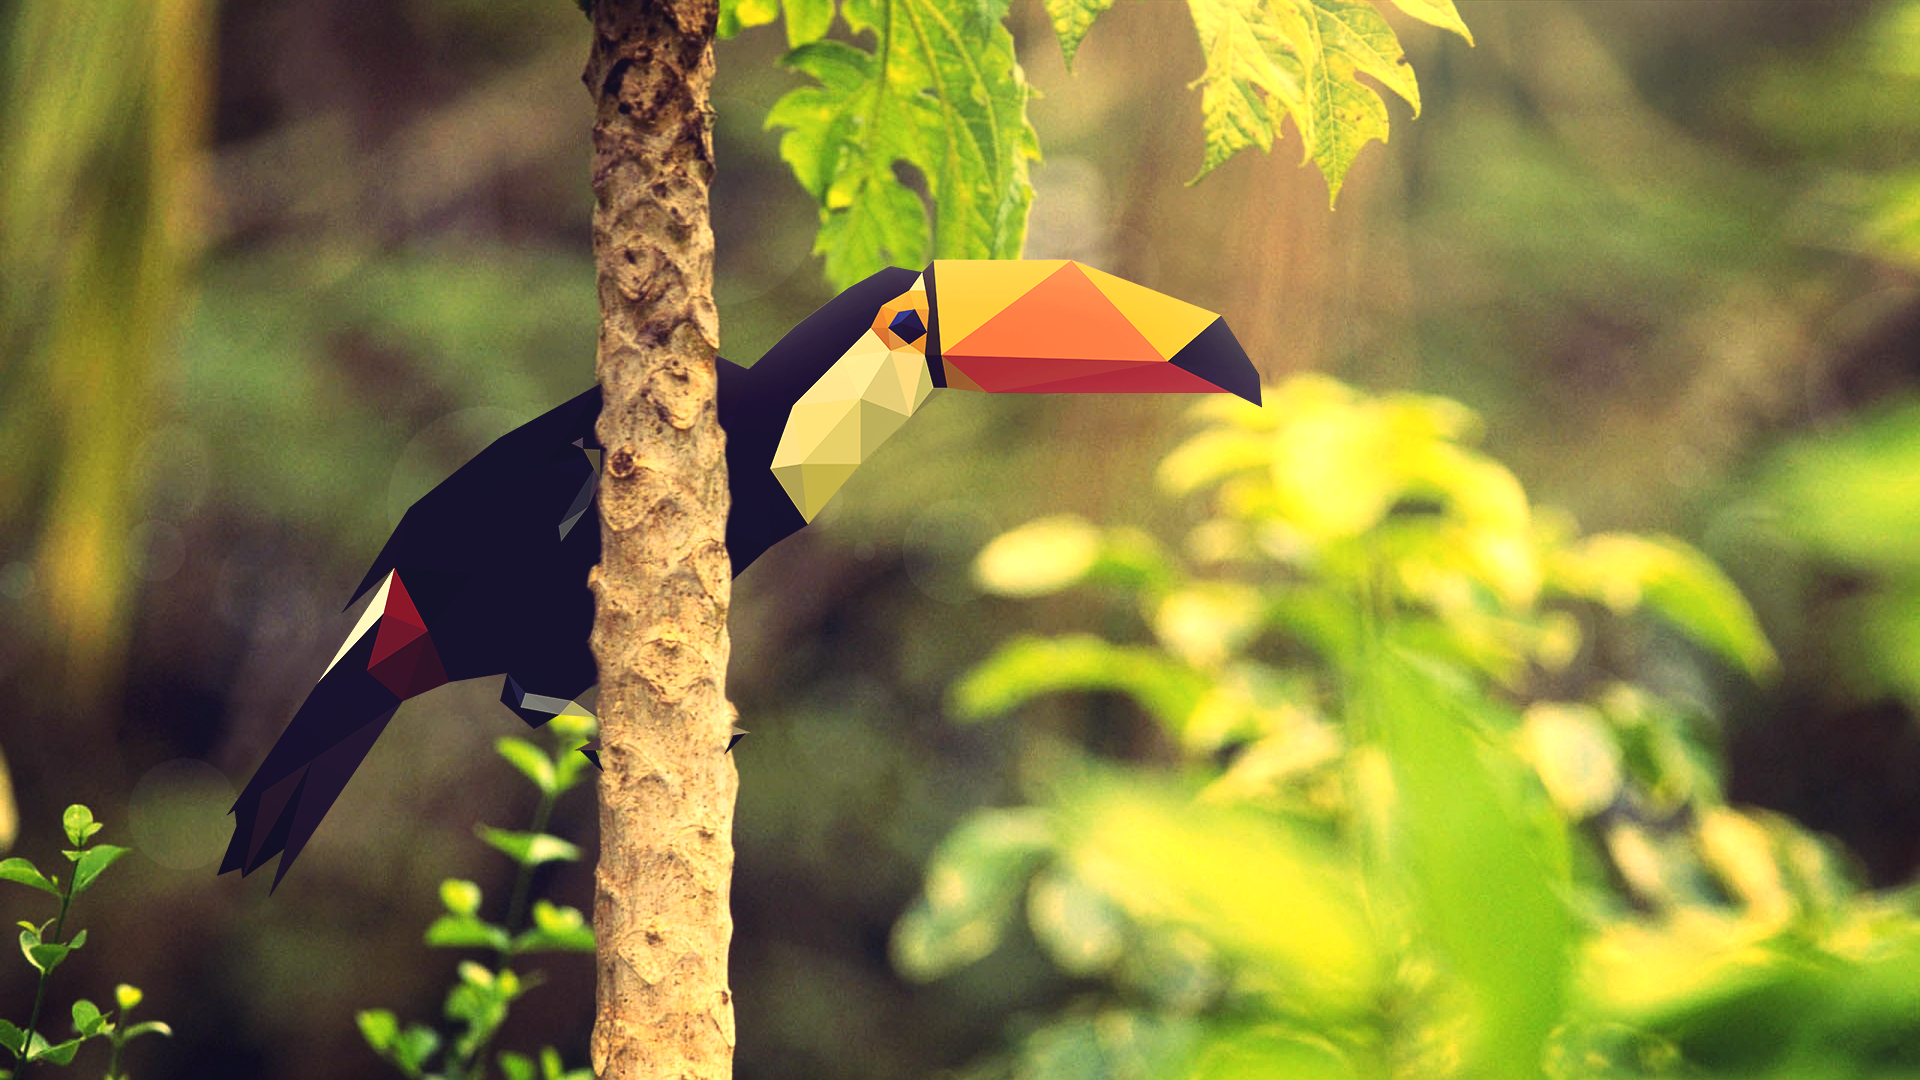 General 1920x1080 colorful low poly toucans digital art birds animals